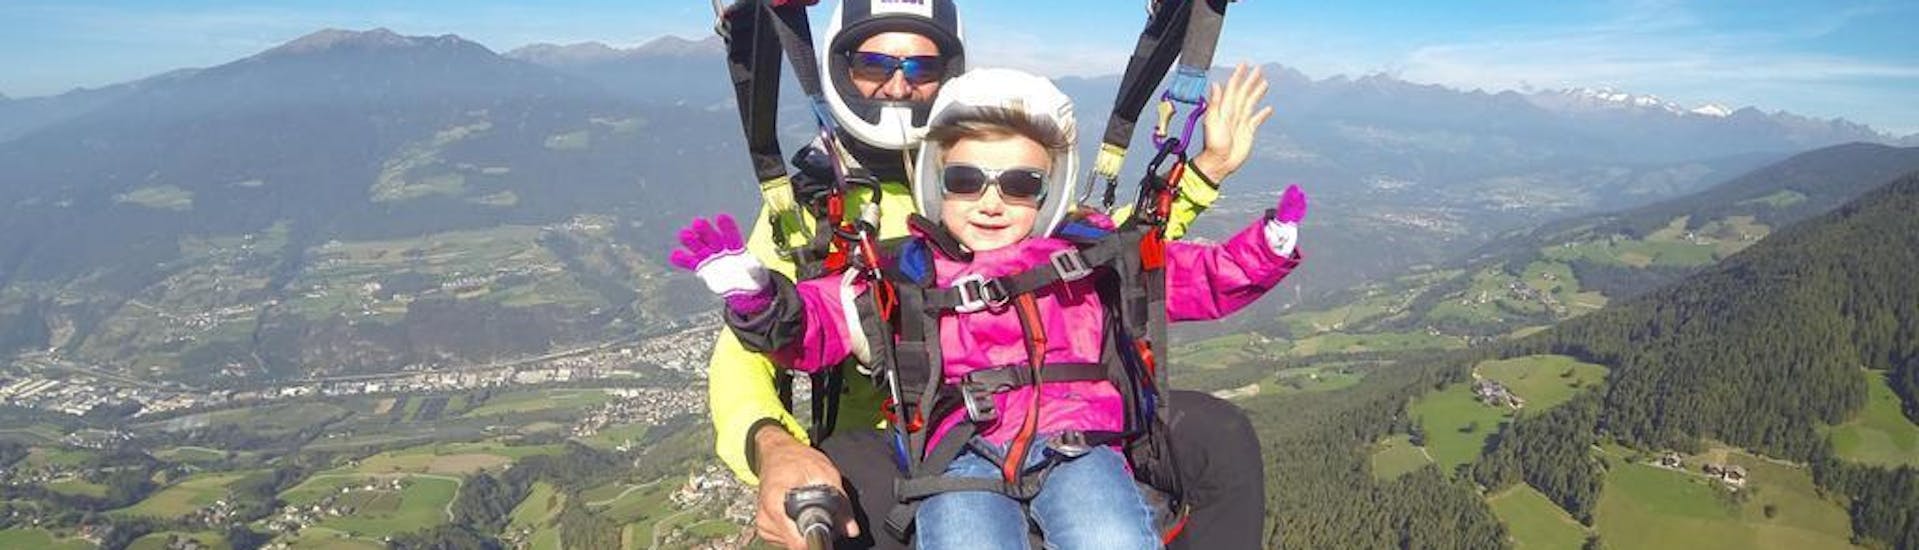 Tandem Paragliding from Plose for Children.